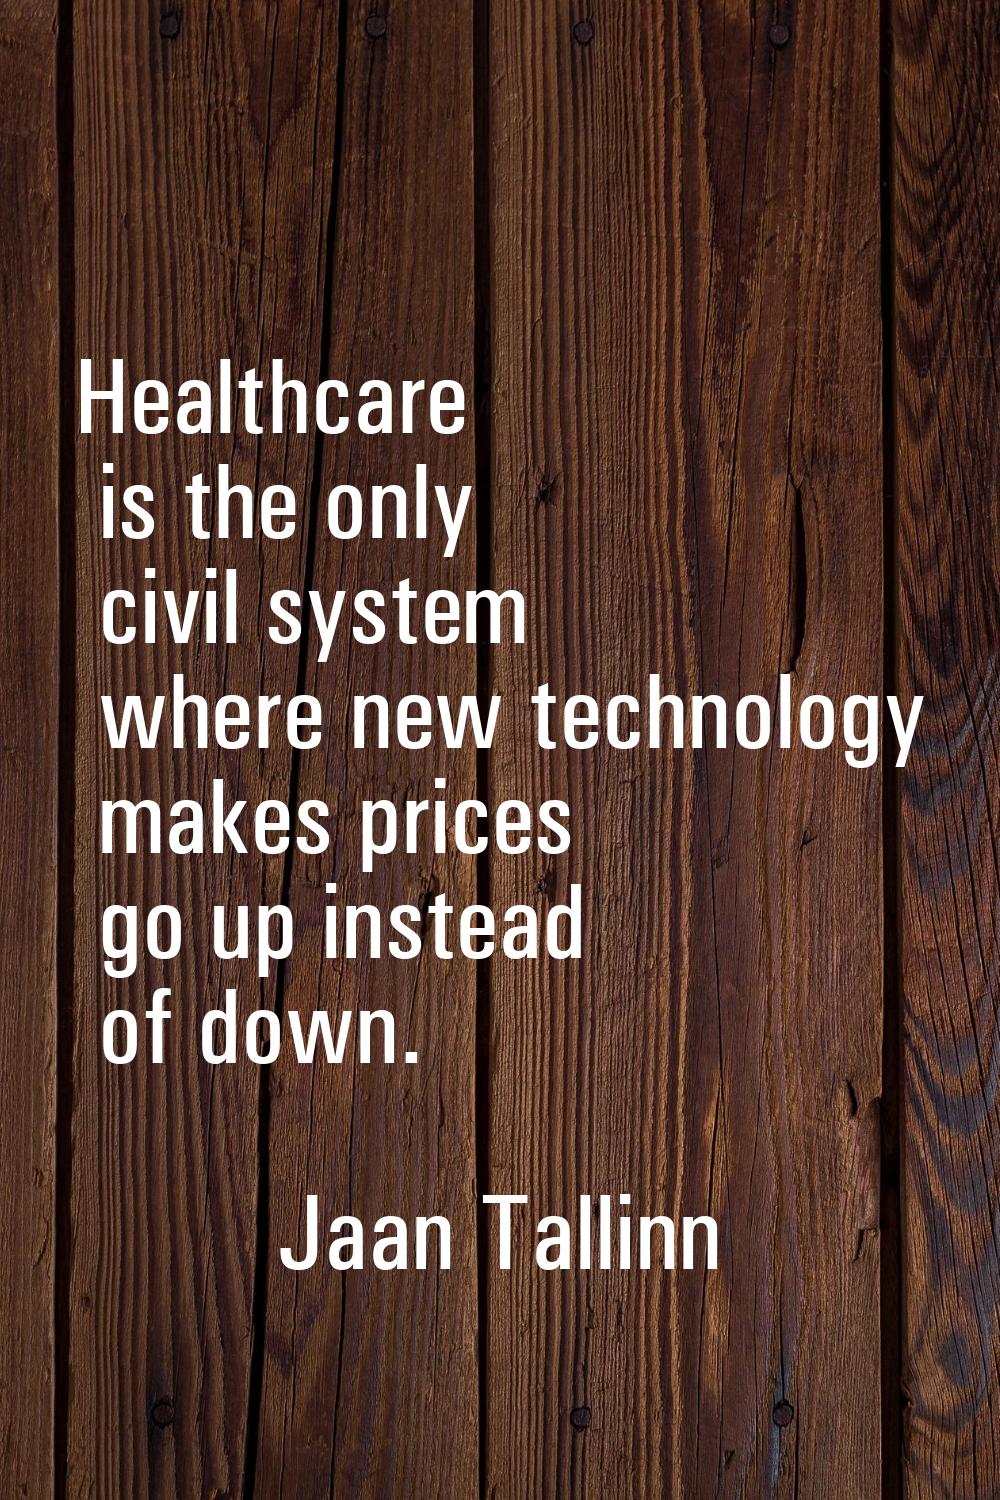 Healthcare is the only civil system where new technology makes prices go up instead of down.